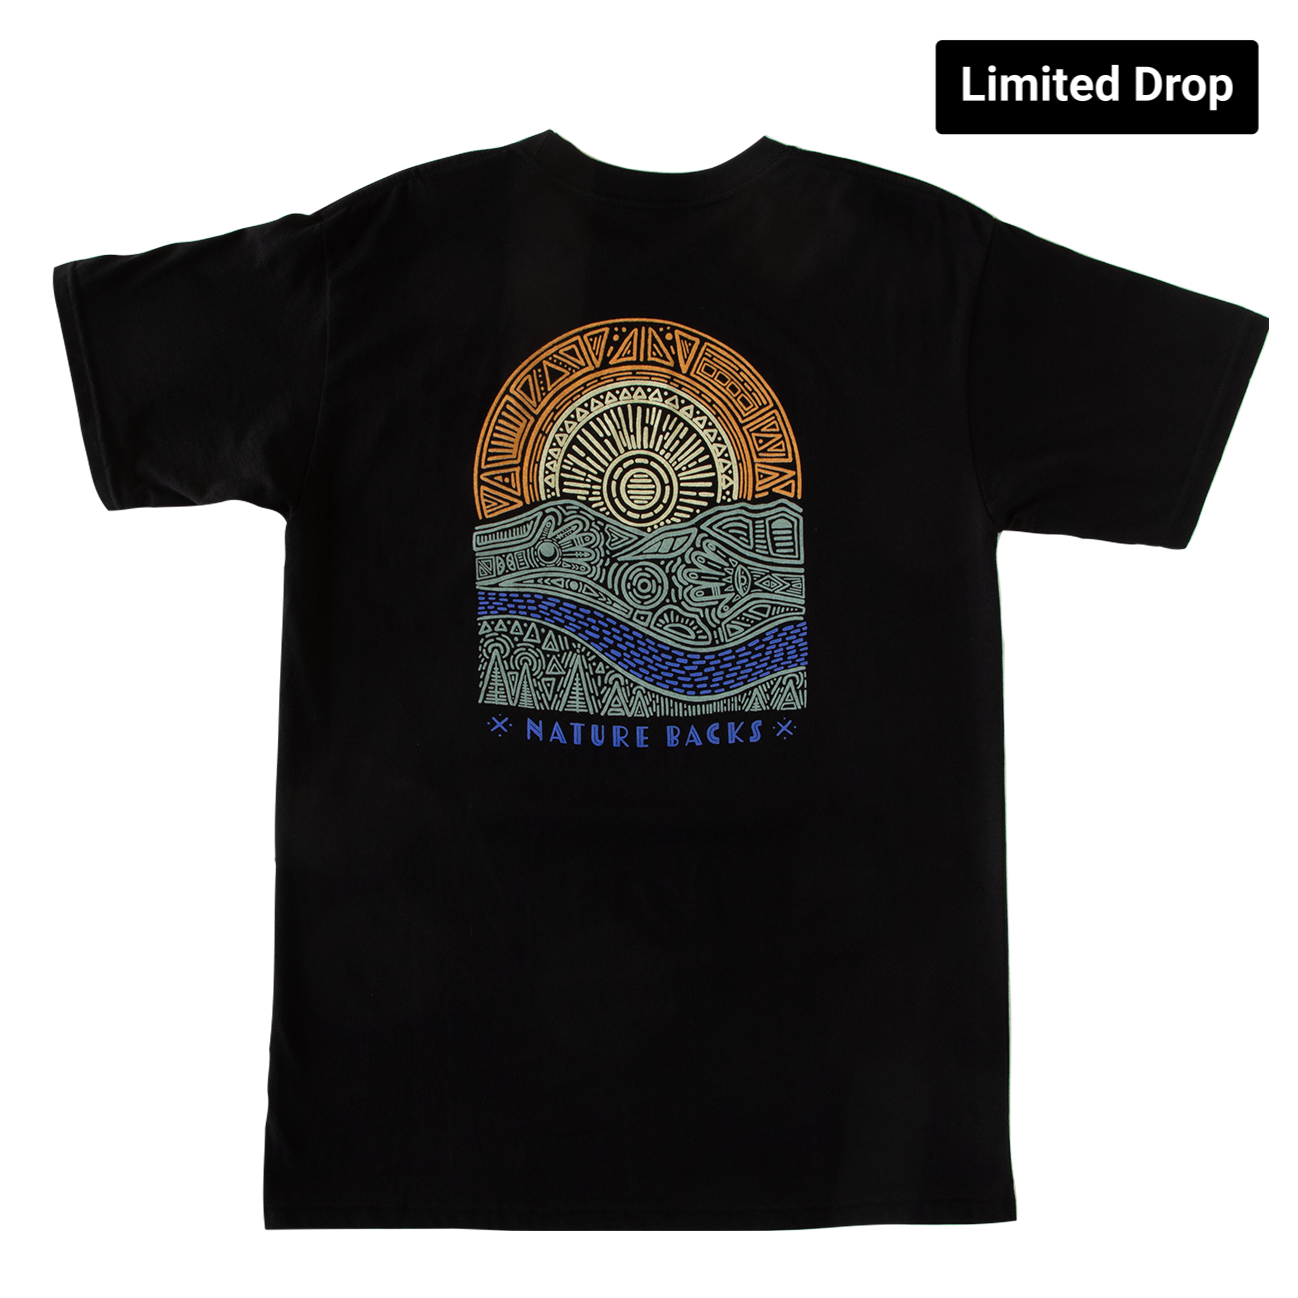 Nature Backs Limited Edition Short Sleeve 100% Organic Cotton T-Shirt | Limited Origin Black Short Sleeve made with Eco-Friendly Fibers Sustainably made in the USA 